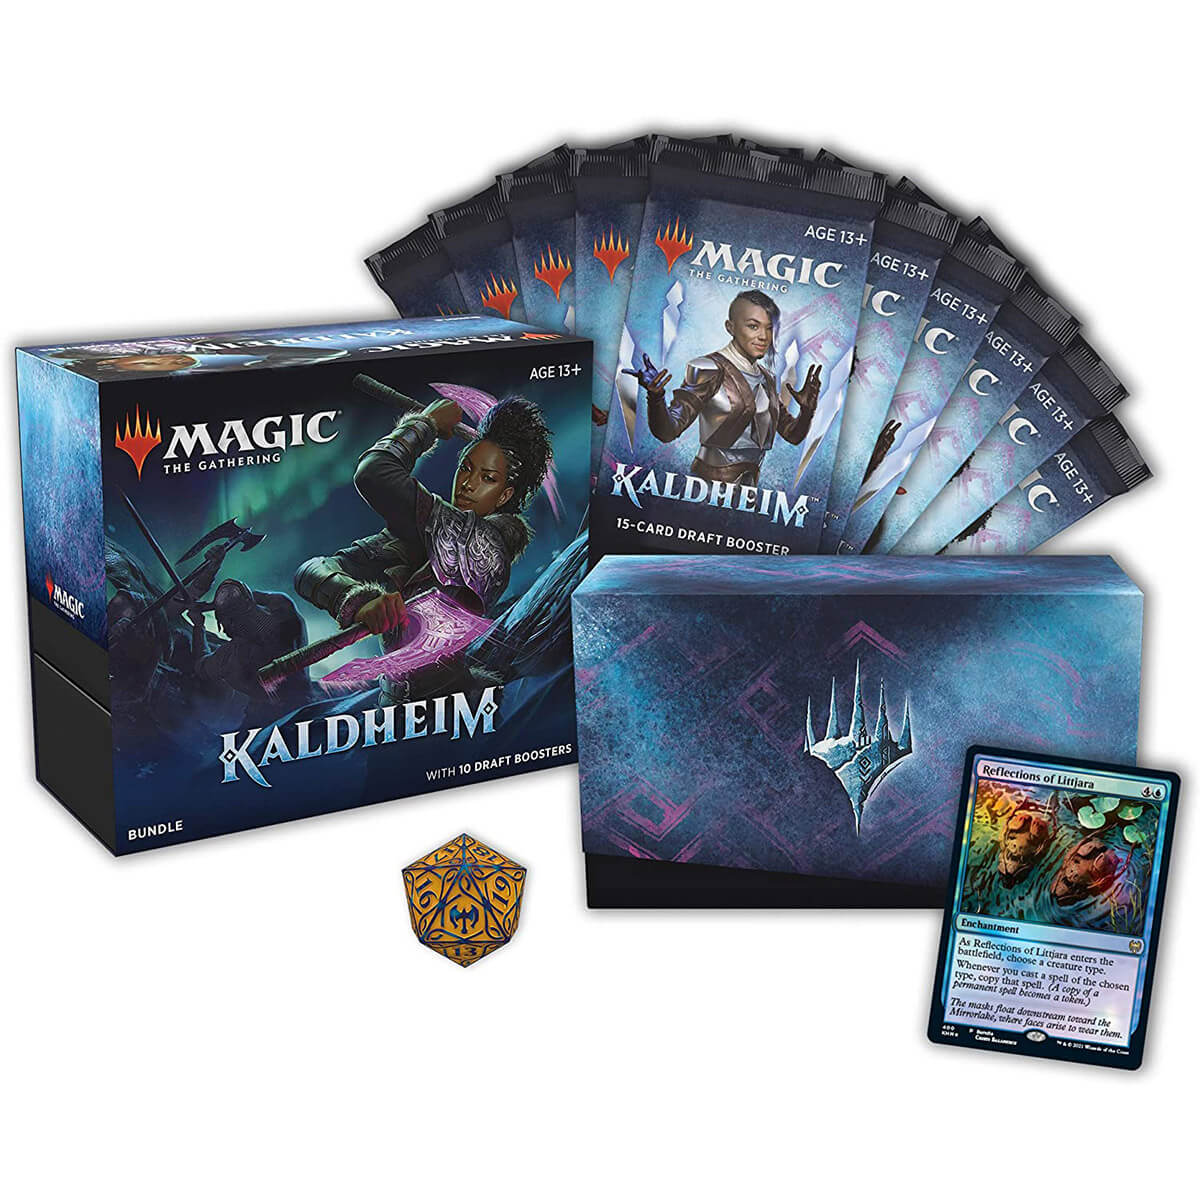 Magic the Gathering TCG Kaldheim Bundle with 10 Draft Boosters